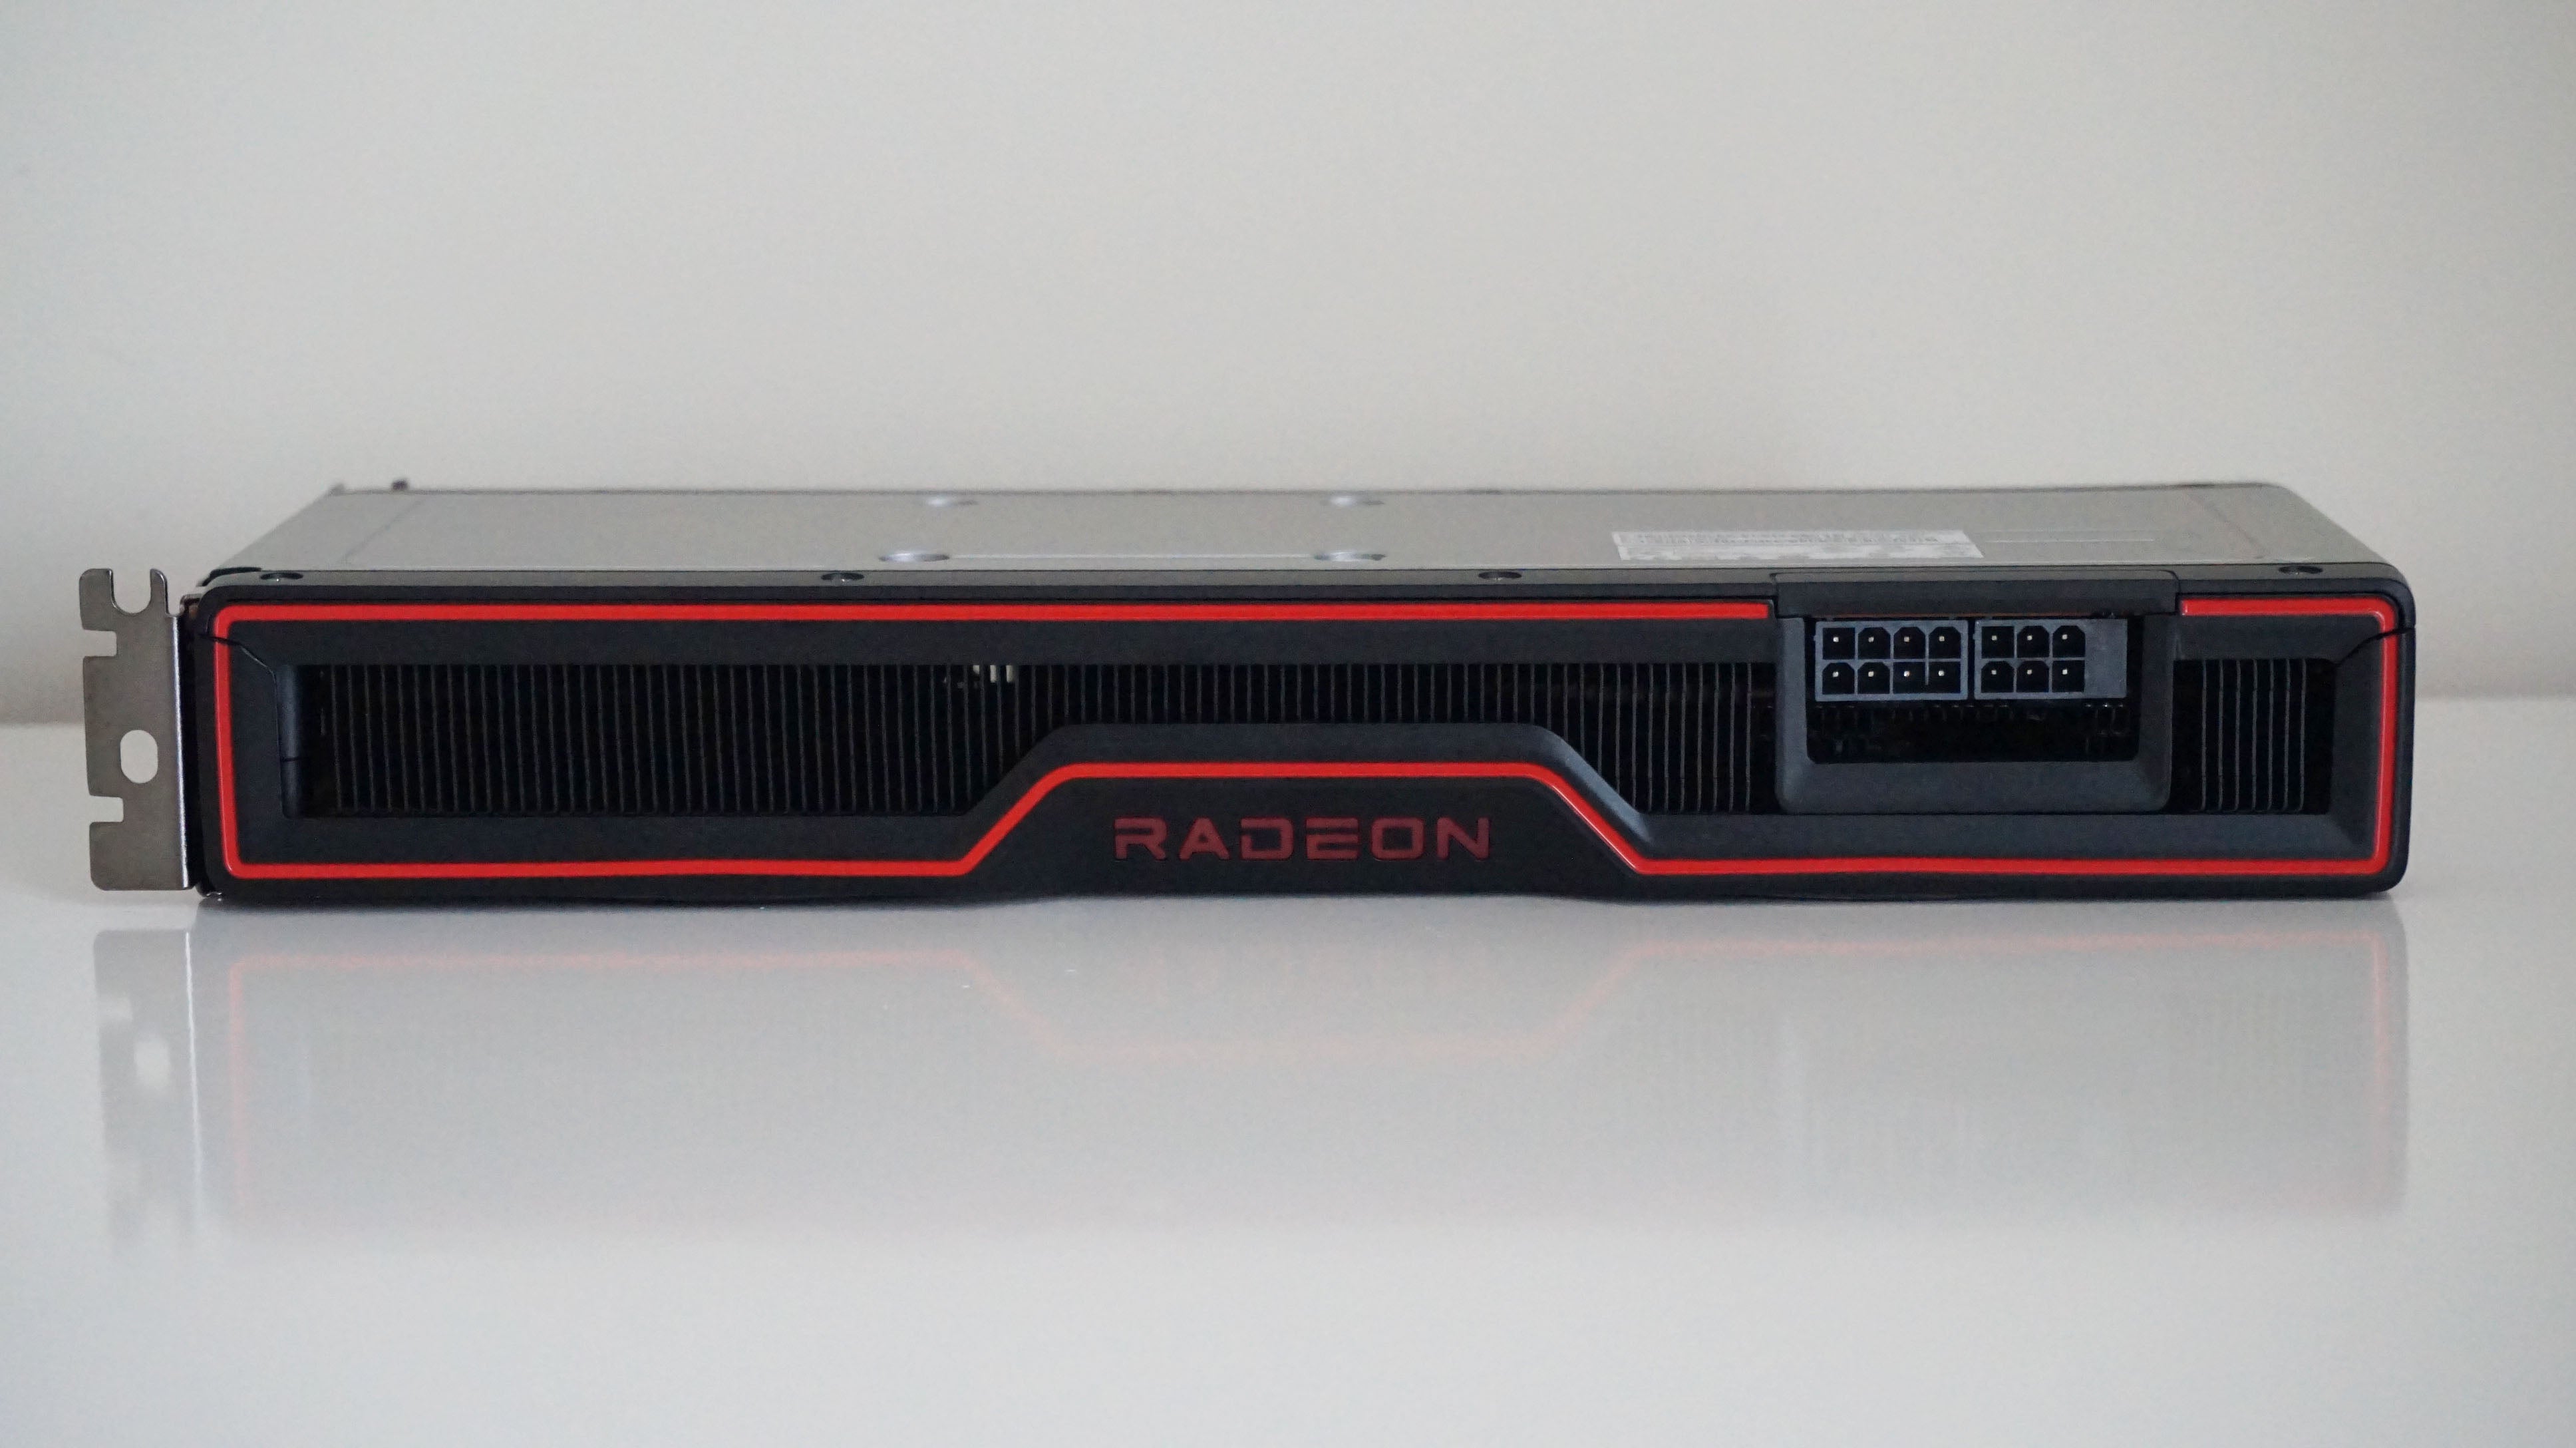 AMD's Radeon RX 6700 XT graphics card from the side, showing its 8 and 6-pin power connectors